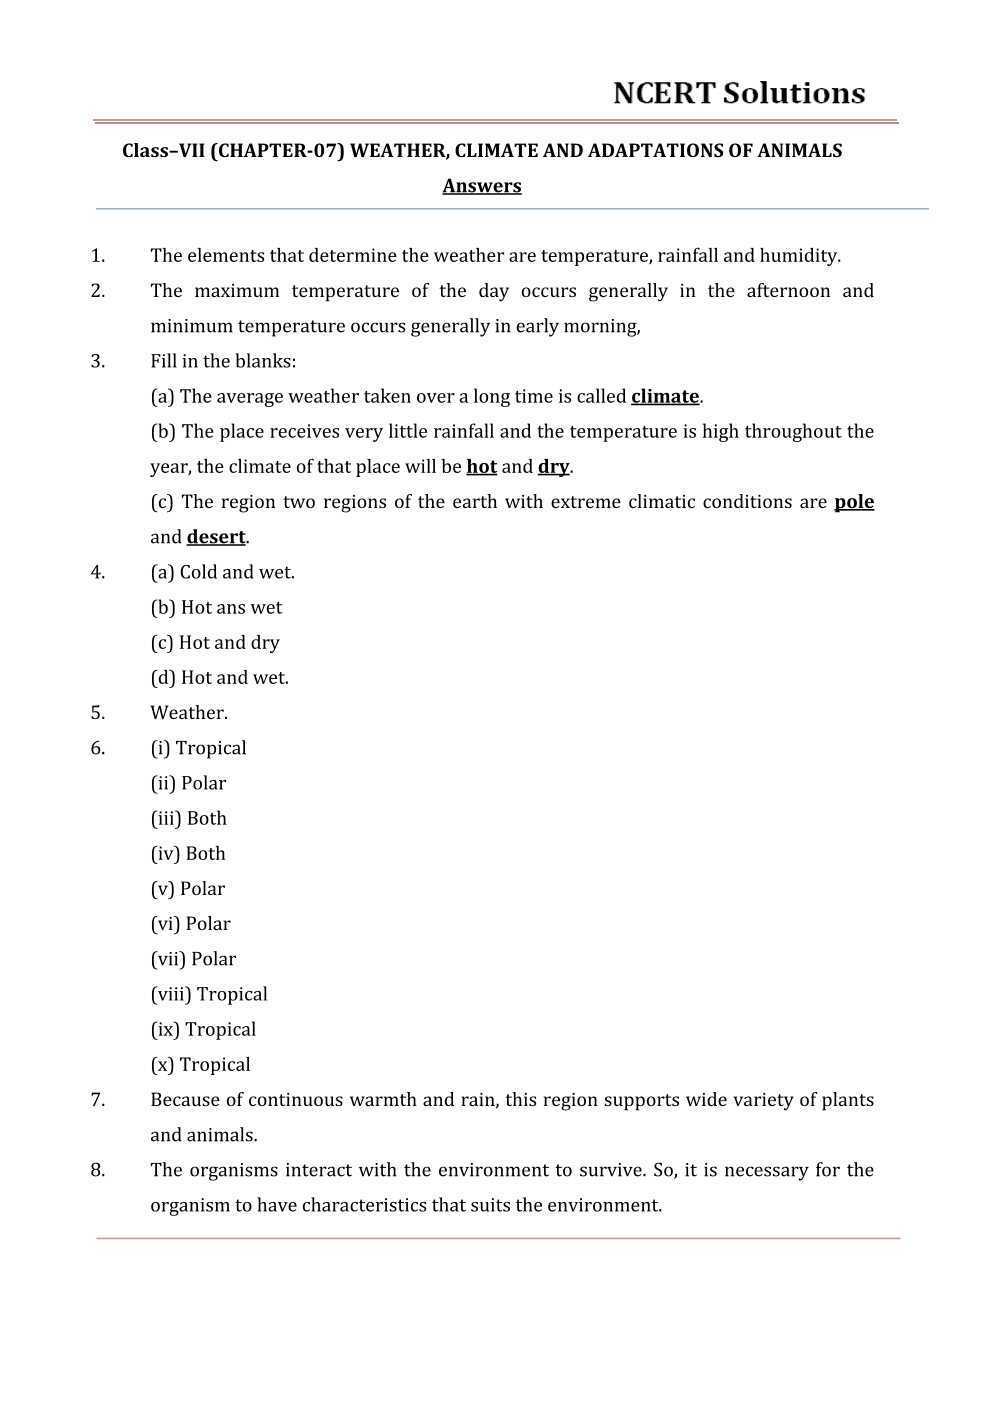 NCERT Solutions For Class 7 science Chapter 7 Weather, Climate, and Adaptations of Animals to Climate